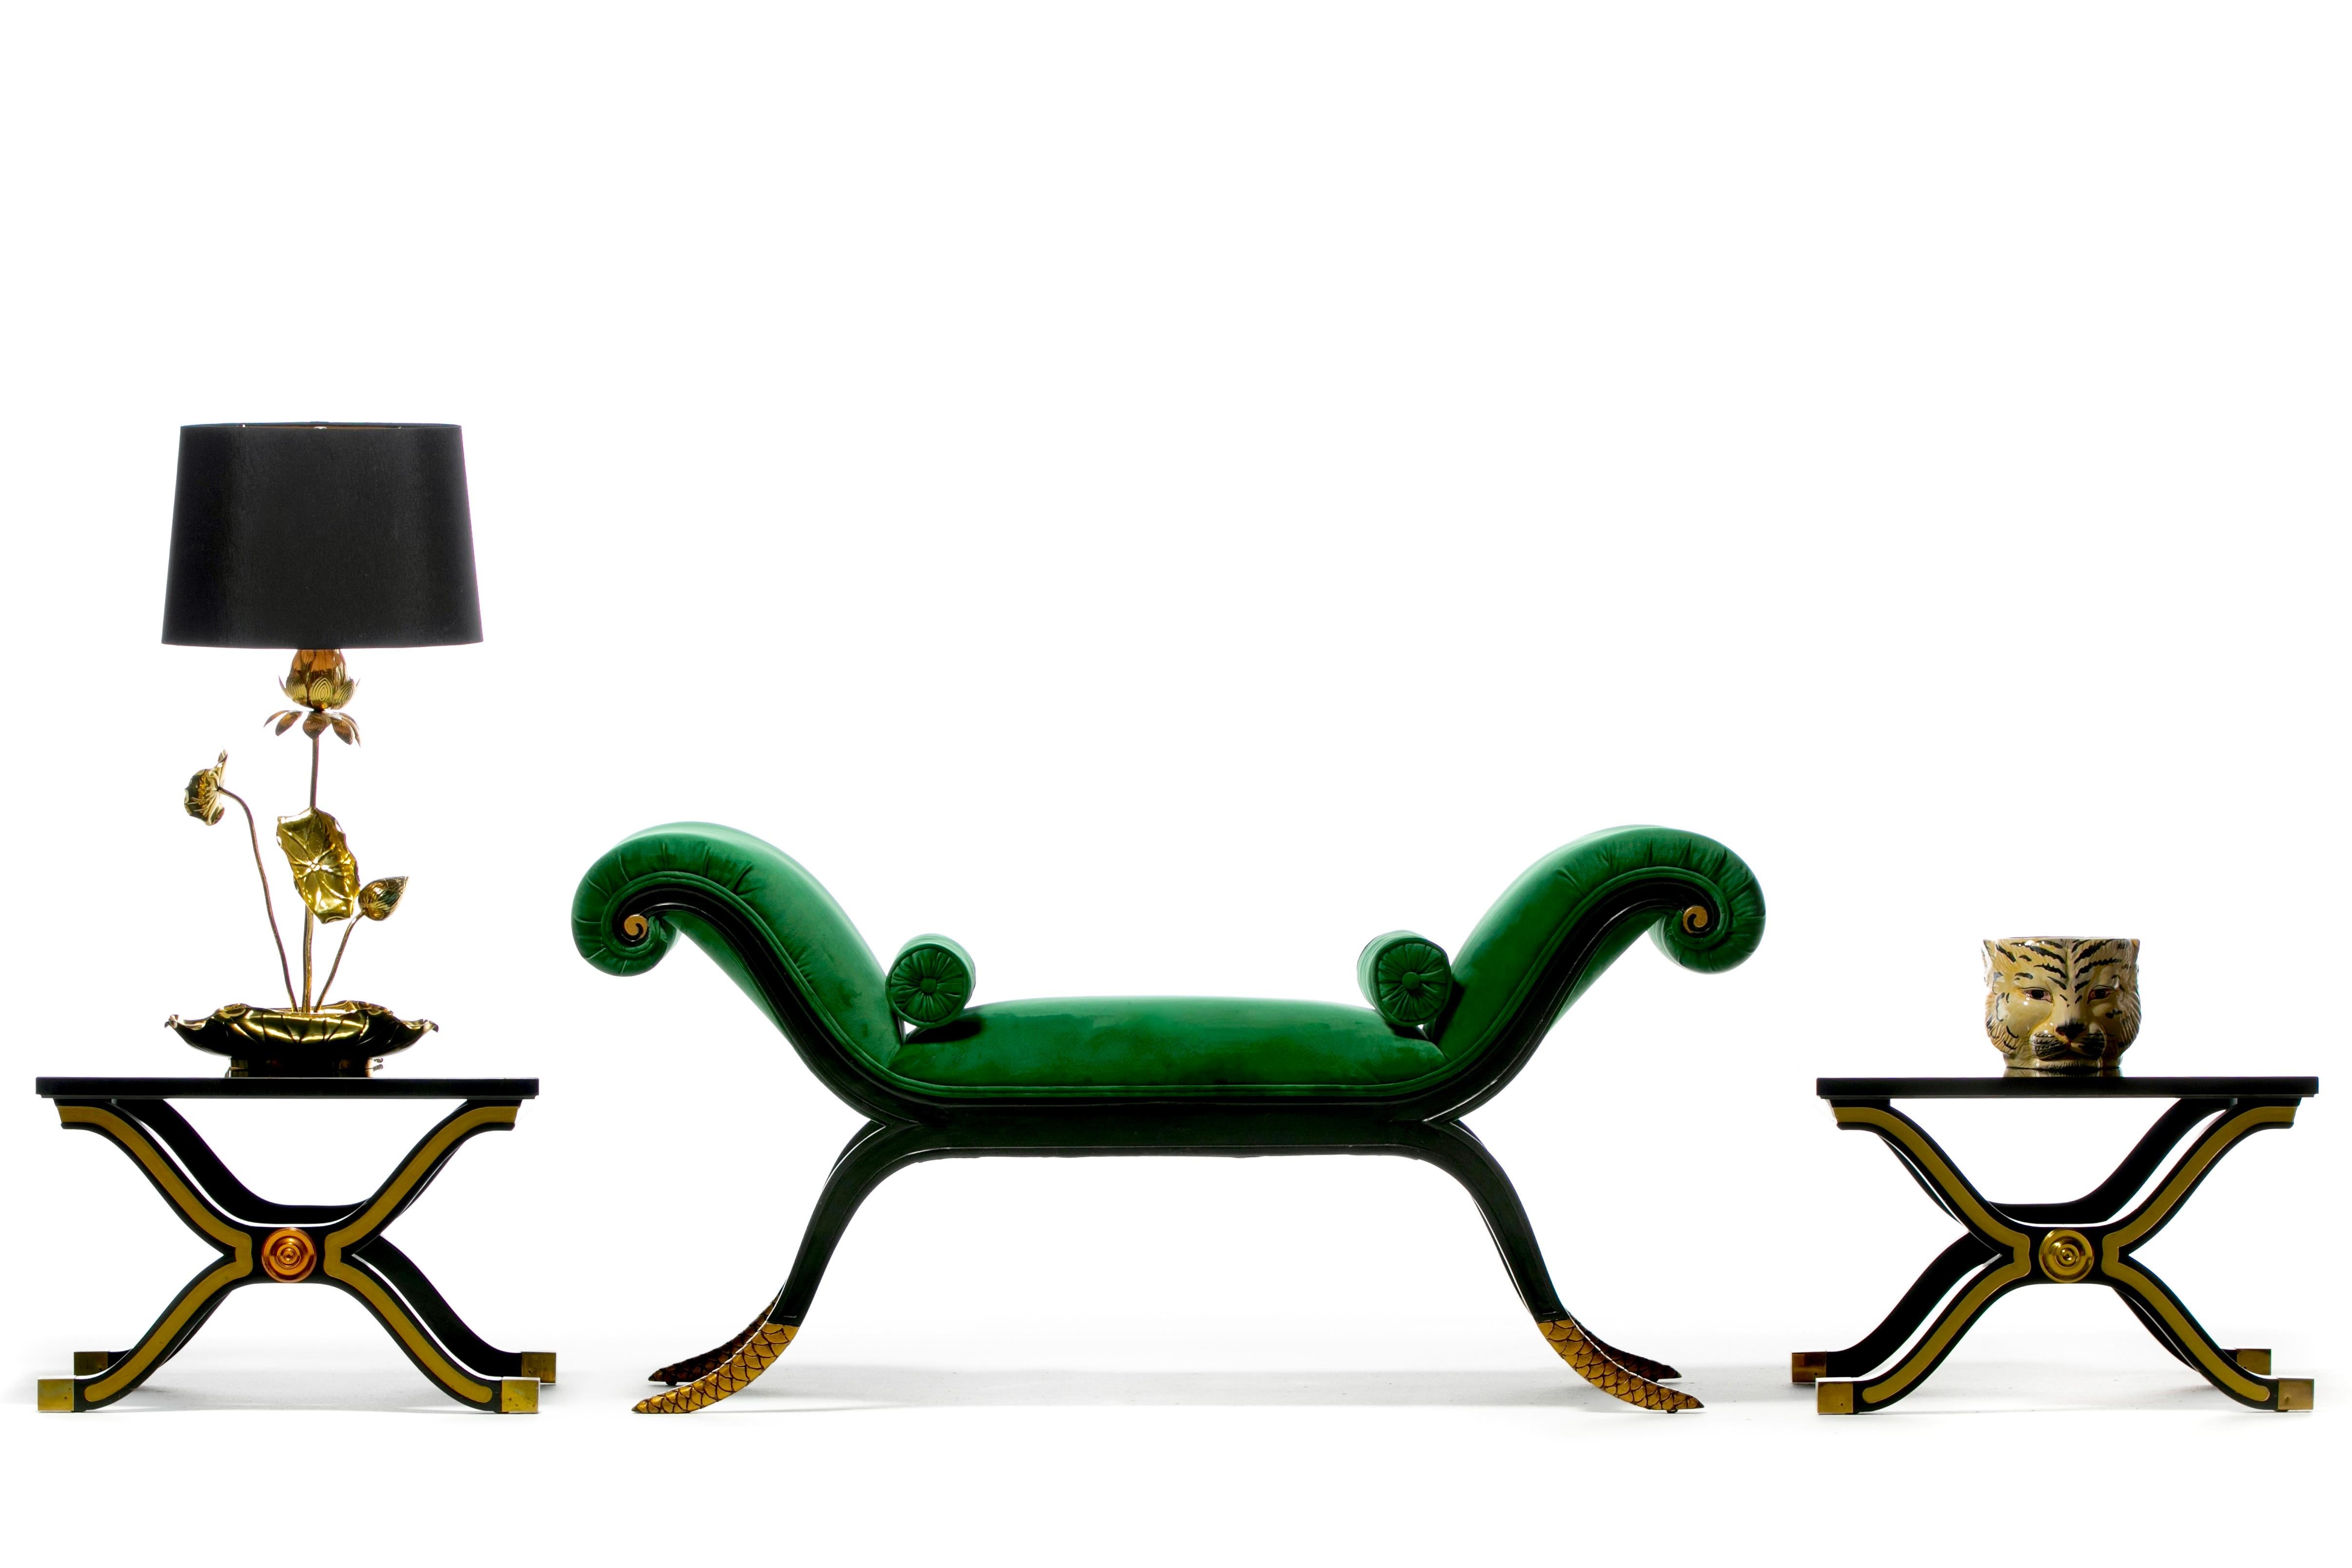 Dorothy Draper style Hollywood Regency black lacquered bench newly professionally upholstered in soft Emerald Green Velvet with adorning tufted bolster pillows. Oozing elegance and glamour from all angles to be appreciated by aficionados of all